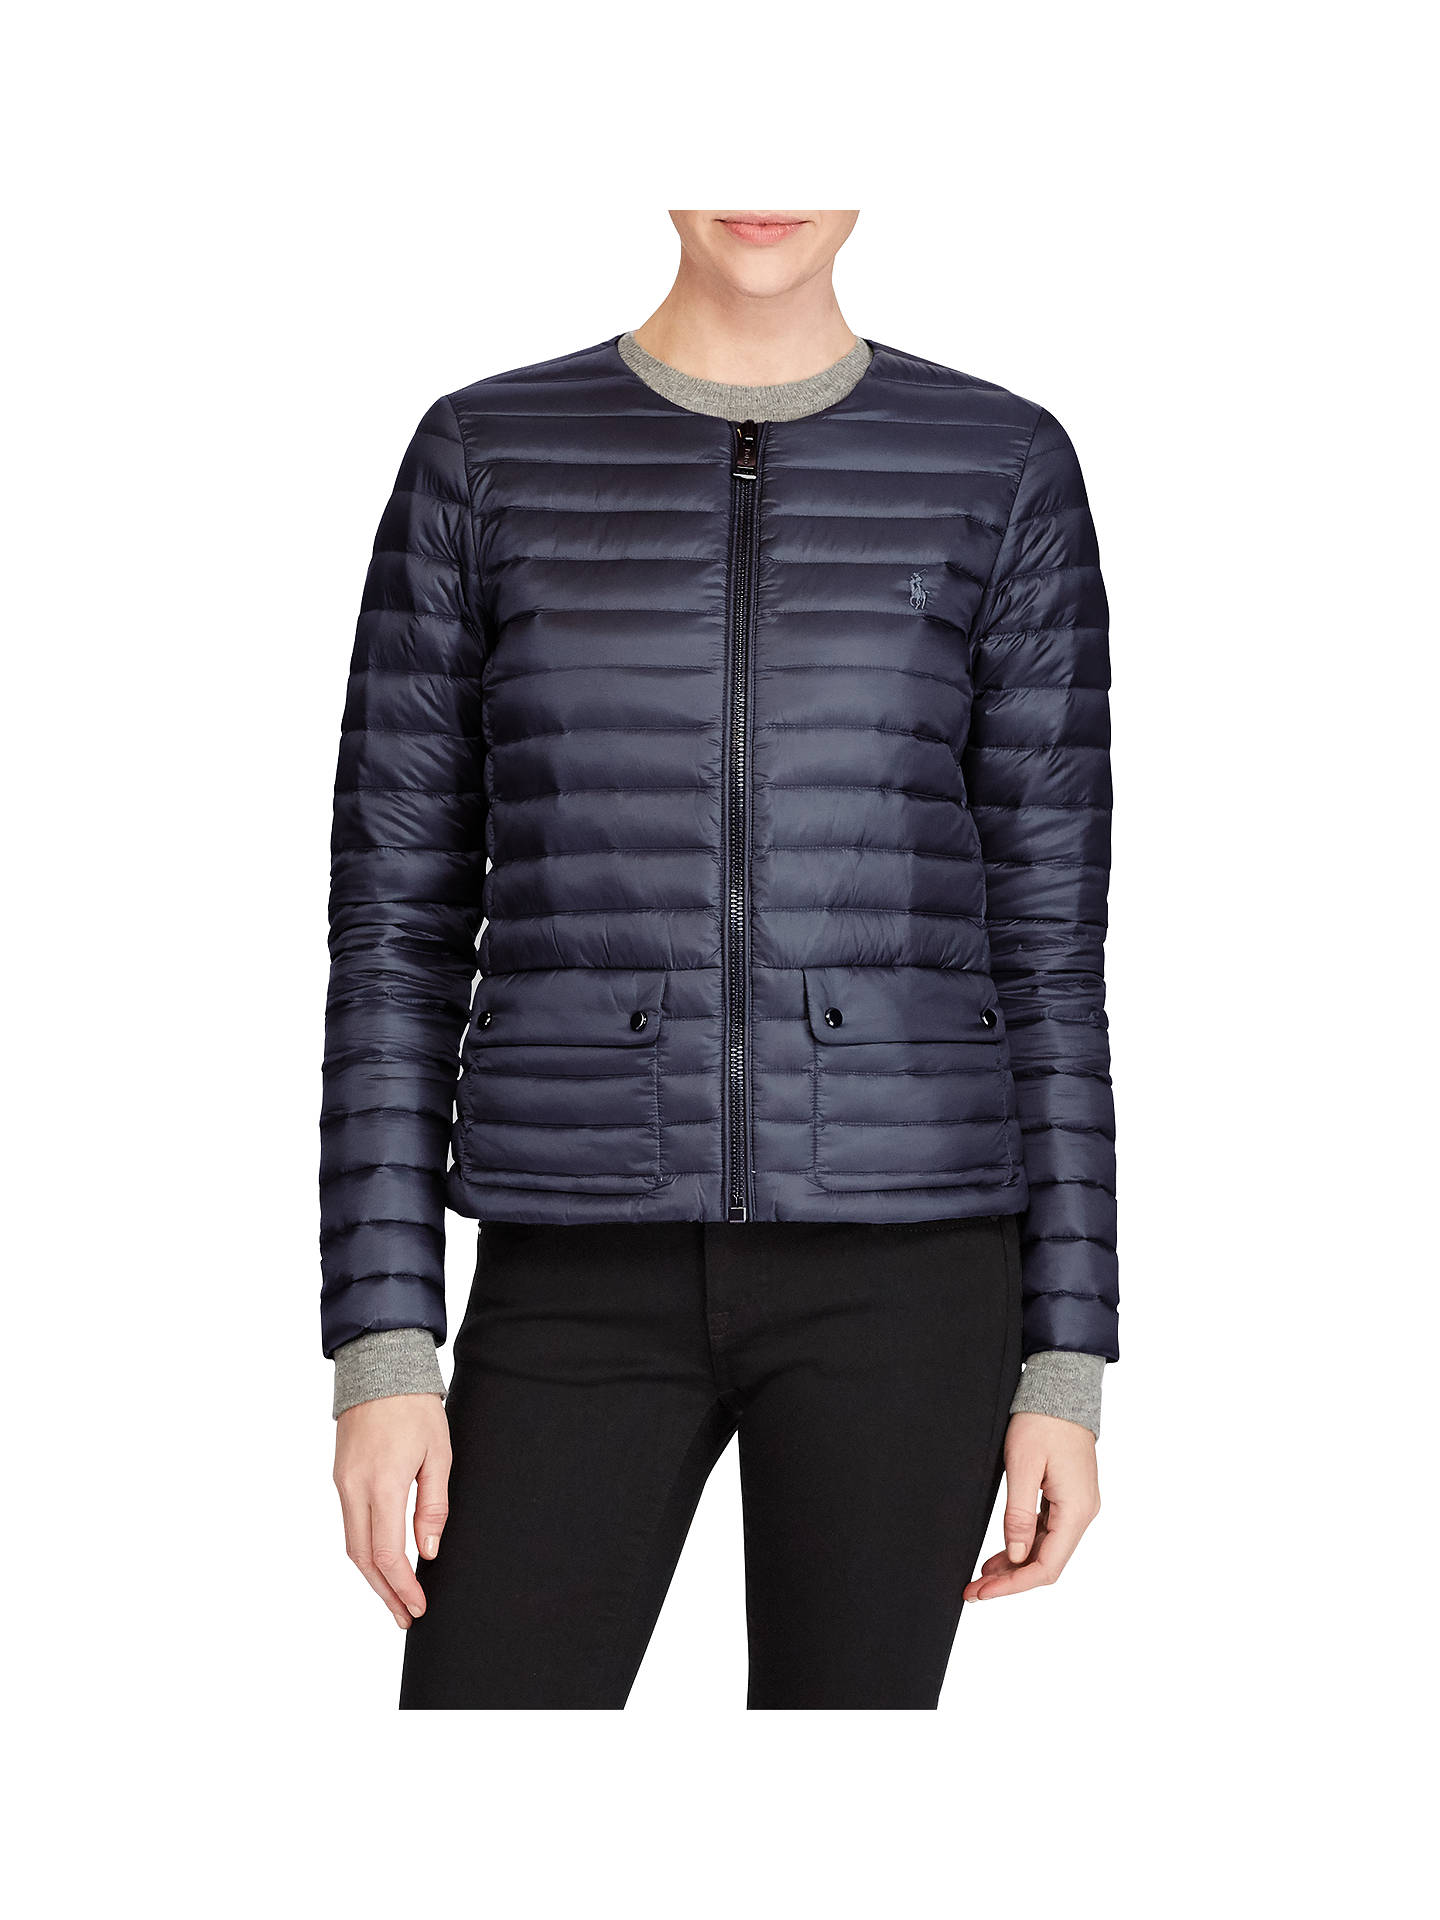 Polo Ralph Lauren Quilted Puffer Down Jacket, Navy at John Lewis & Partners